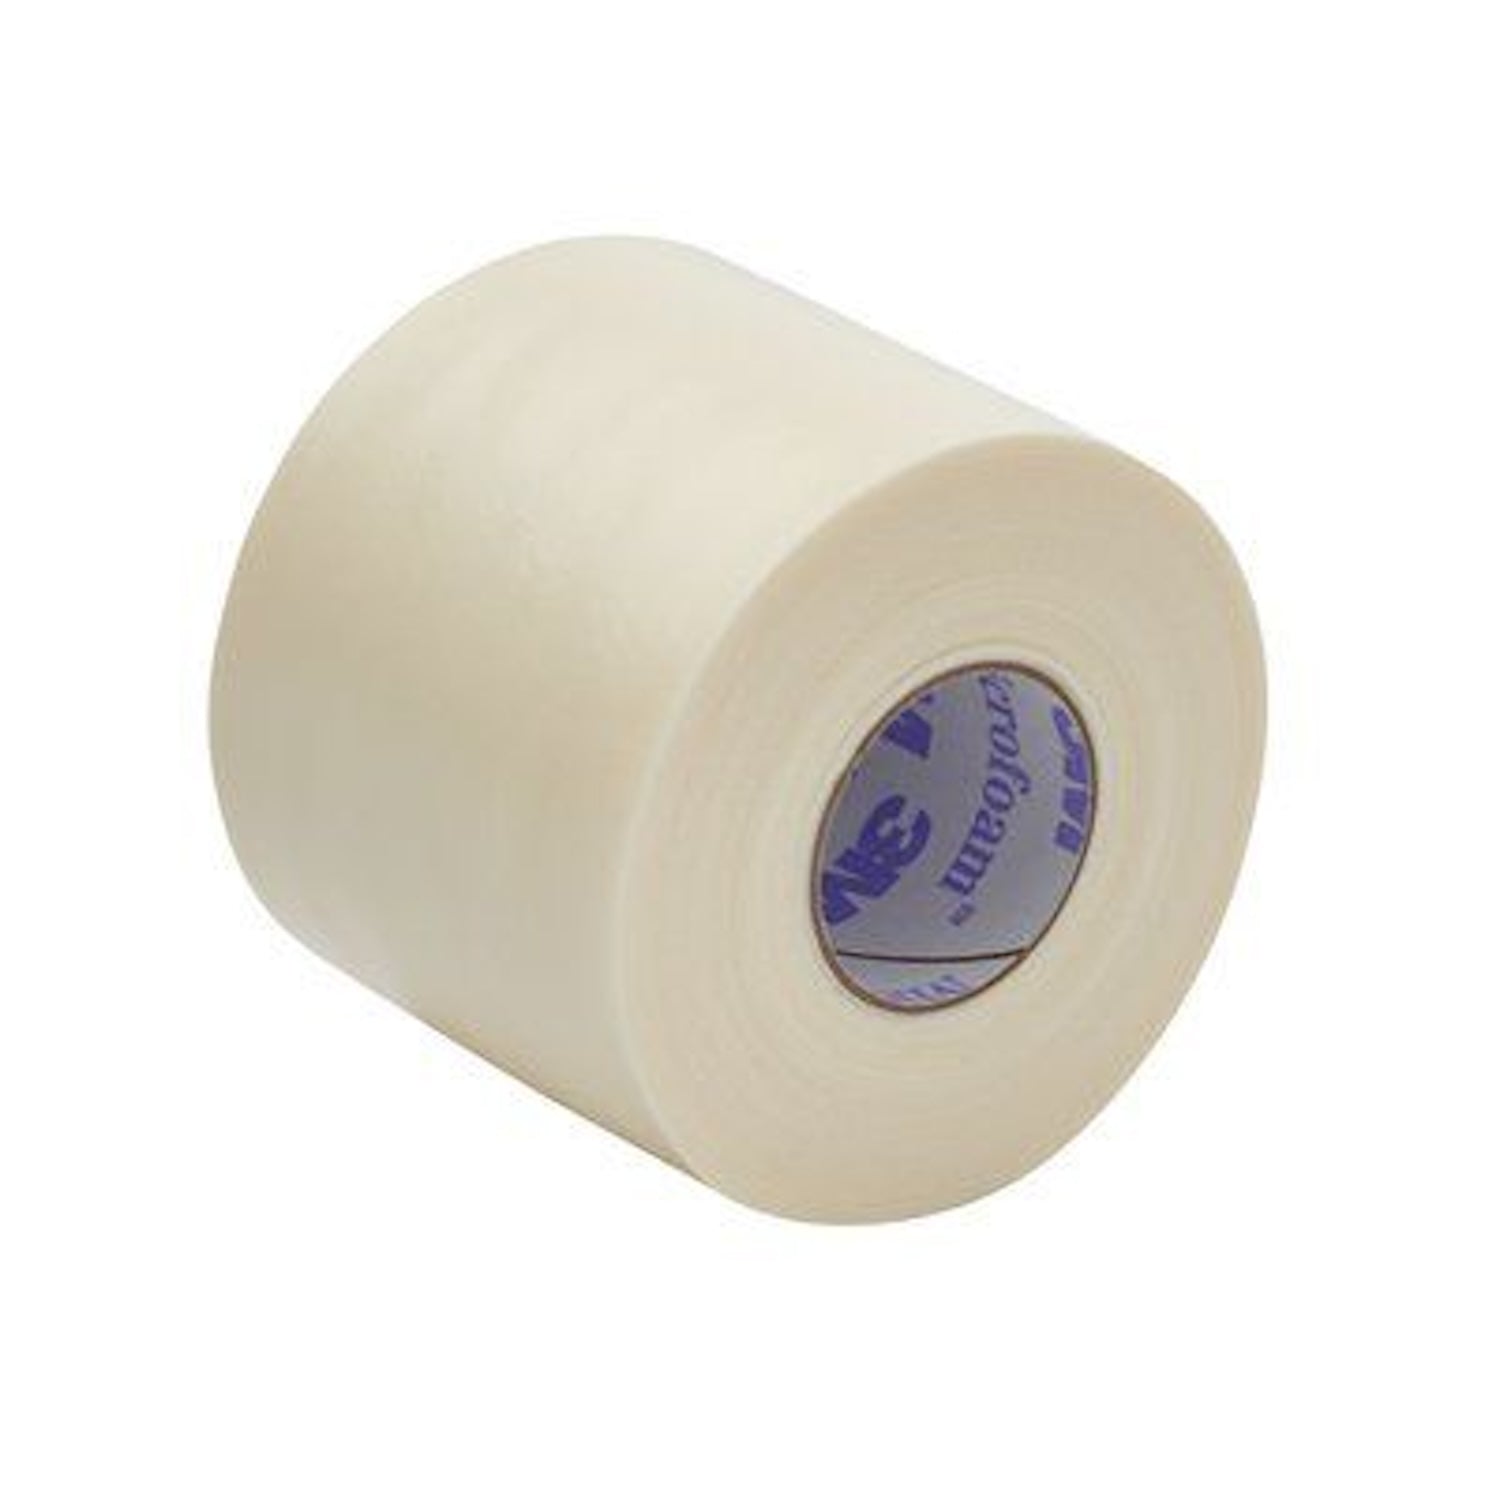 3M Microfoam Surgical Tape | 2.5cm x 5m | Pack of 12 | Short Expiry Date (2)